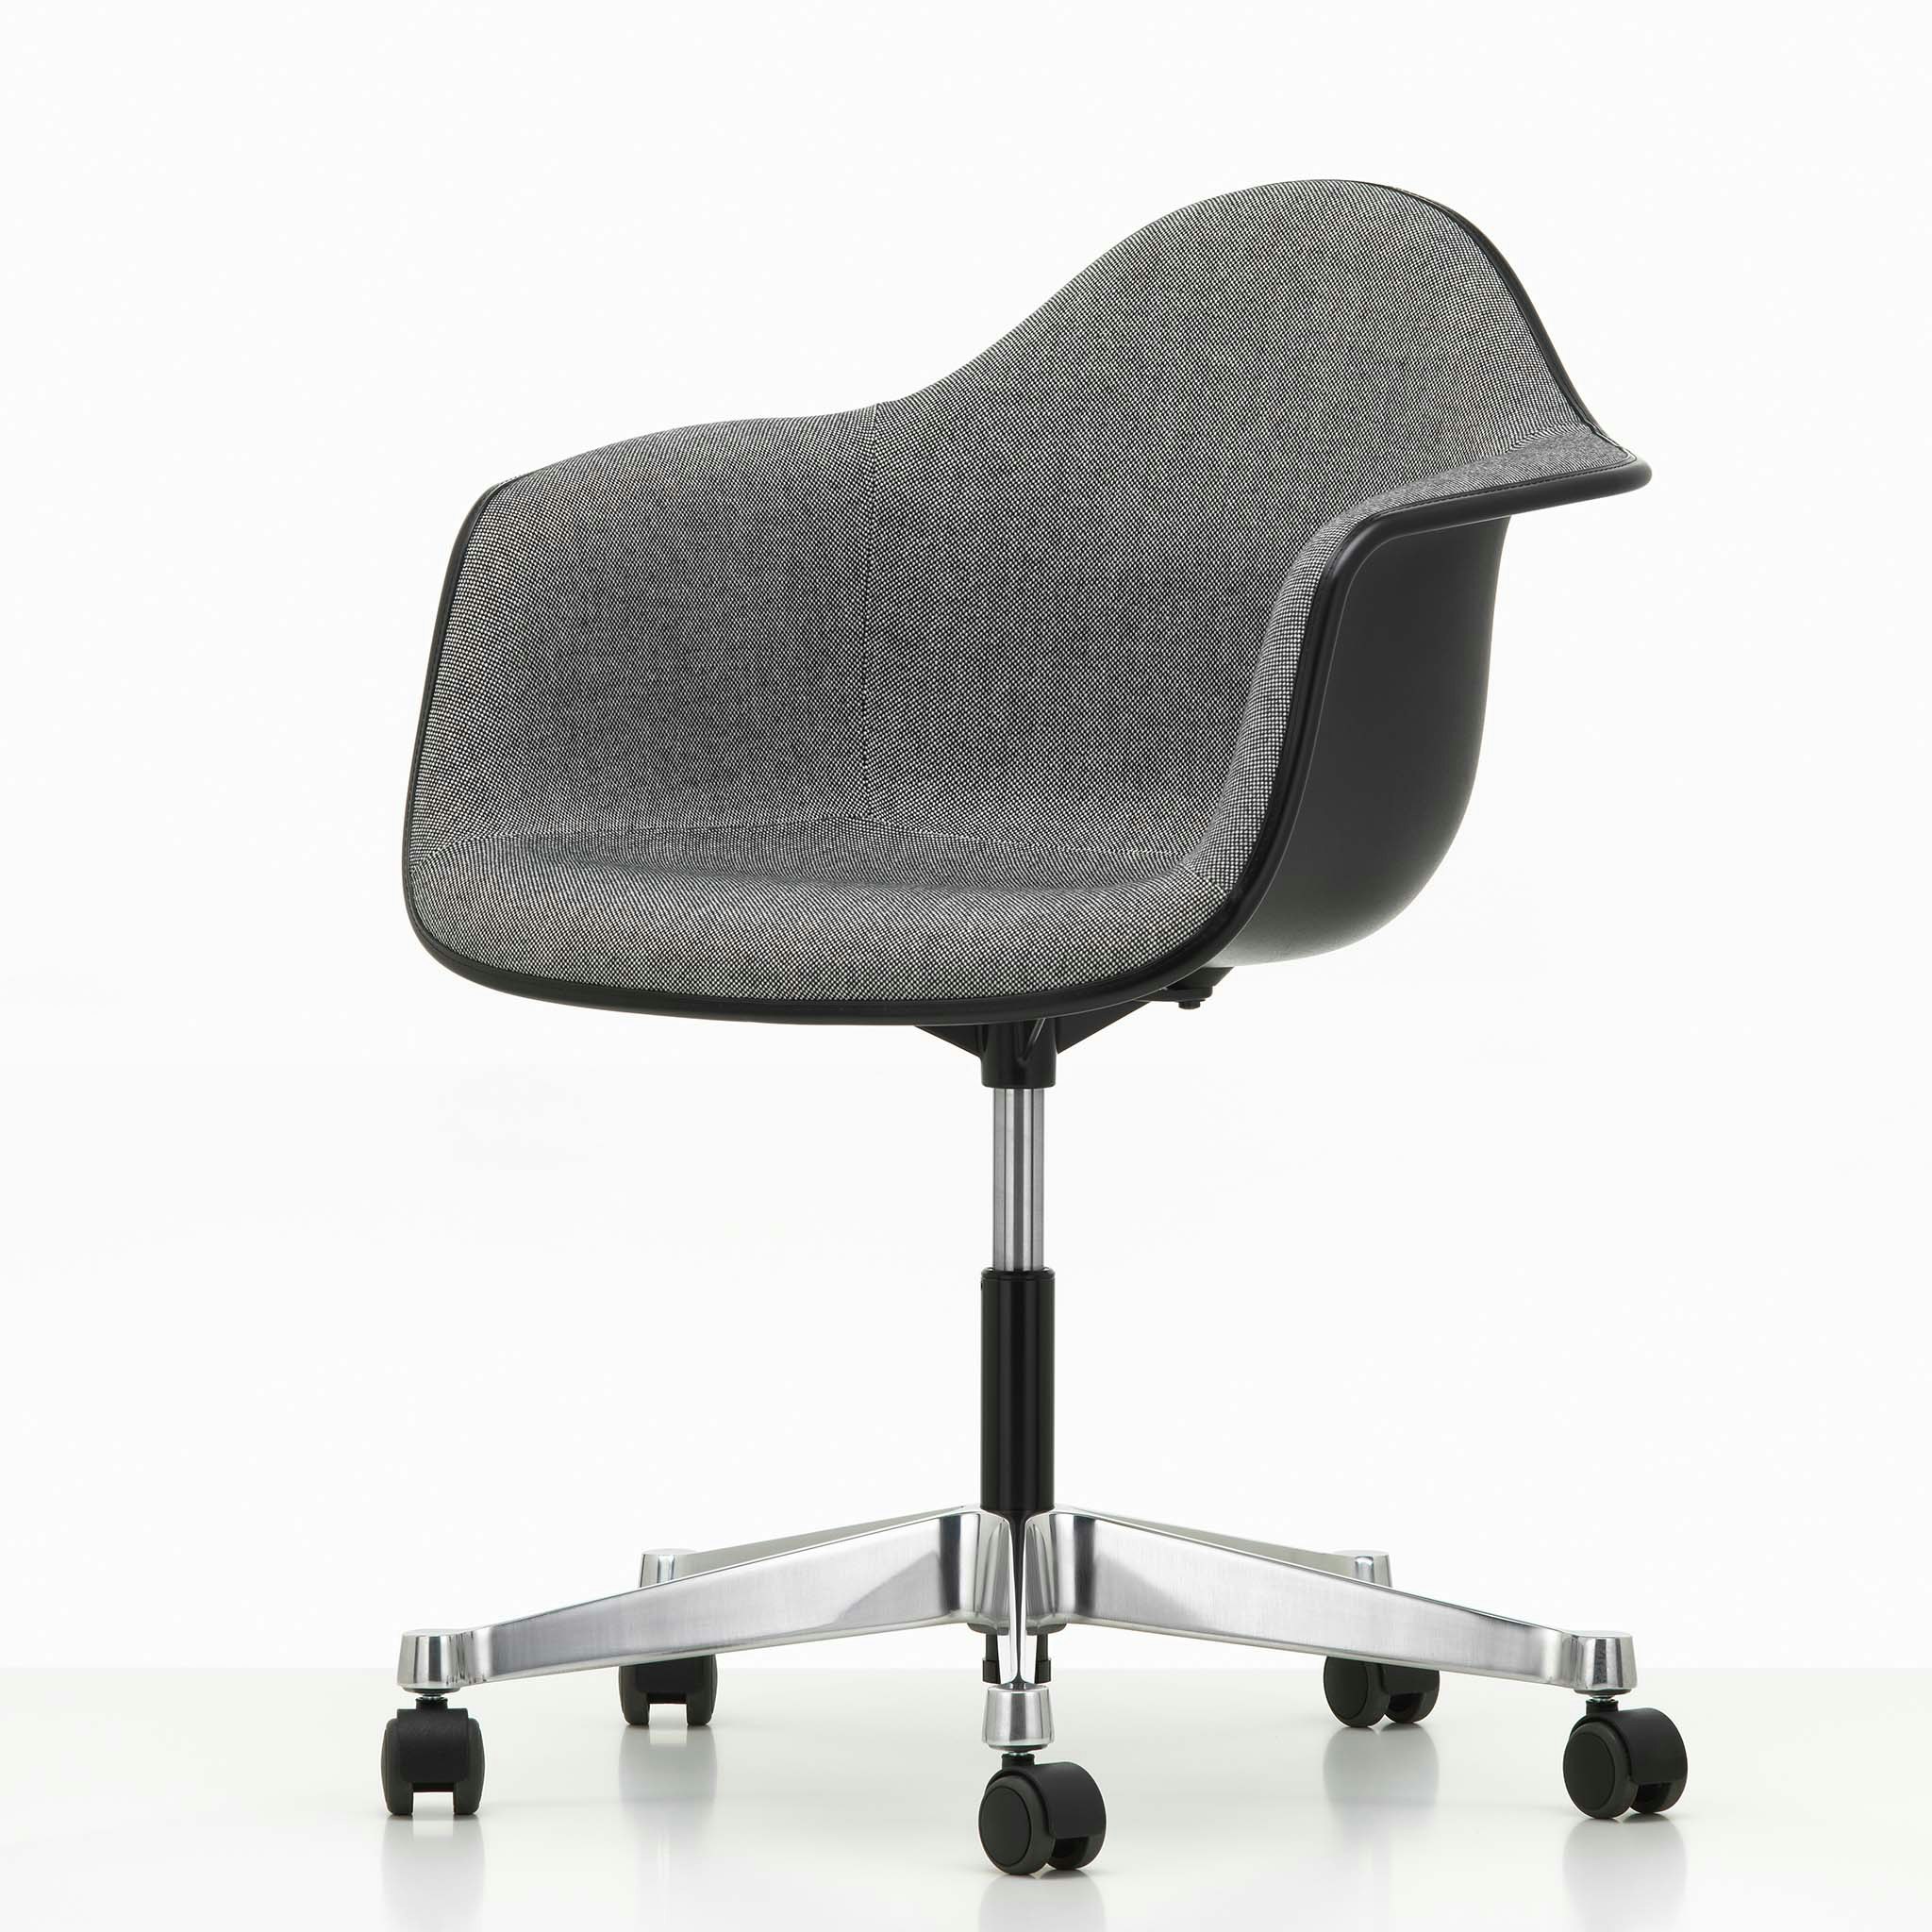 PACC chair by Vitra